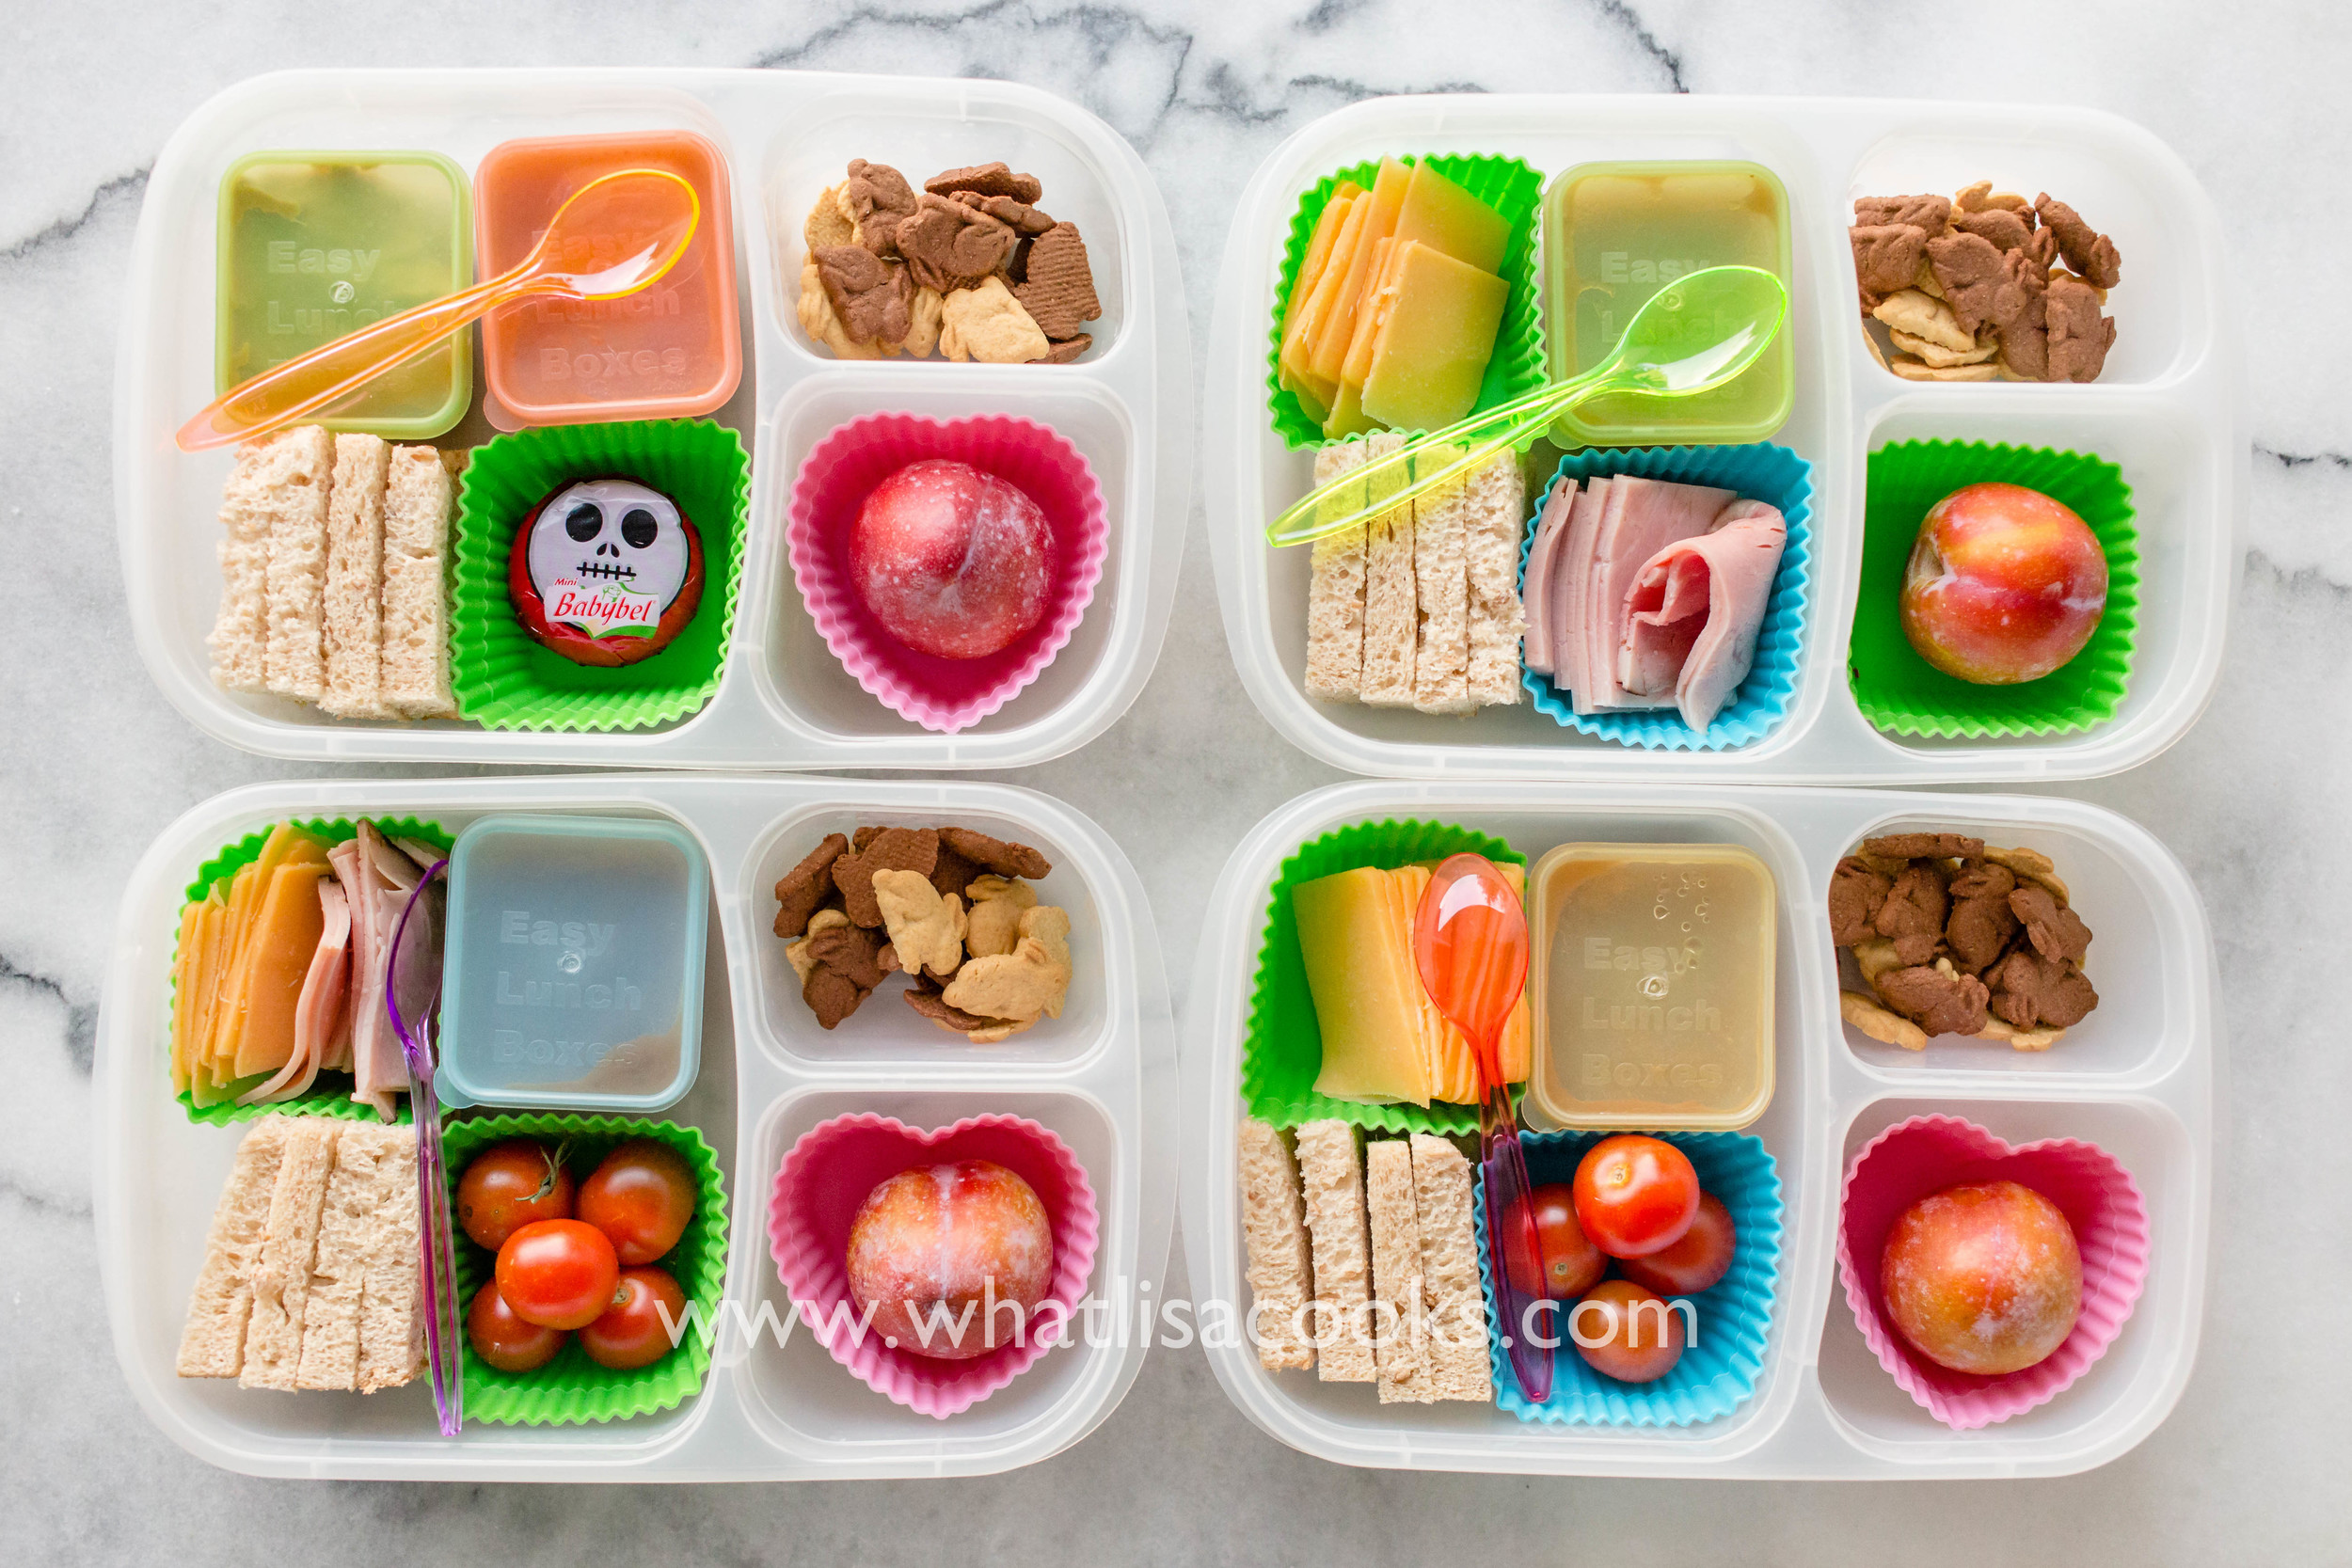 How to Get Your Kids to Pack Their Own Lunch